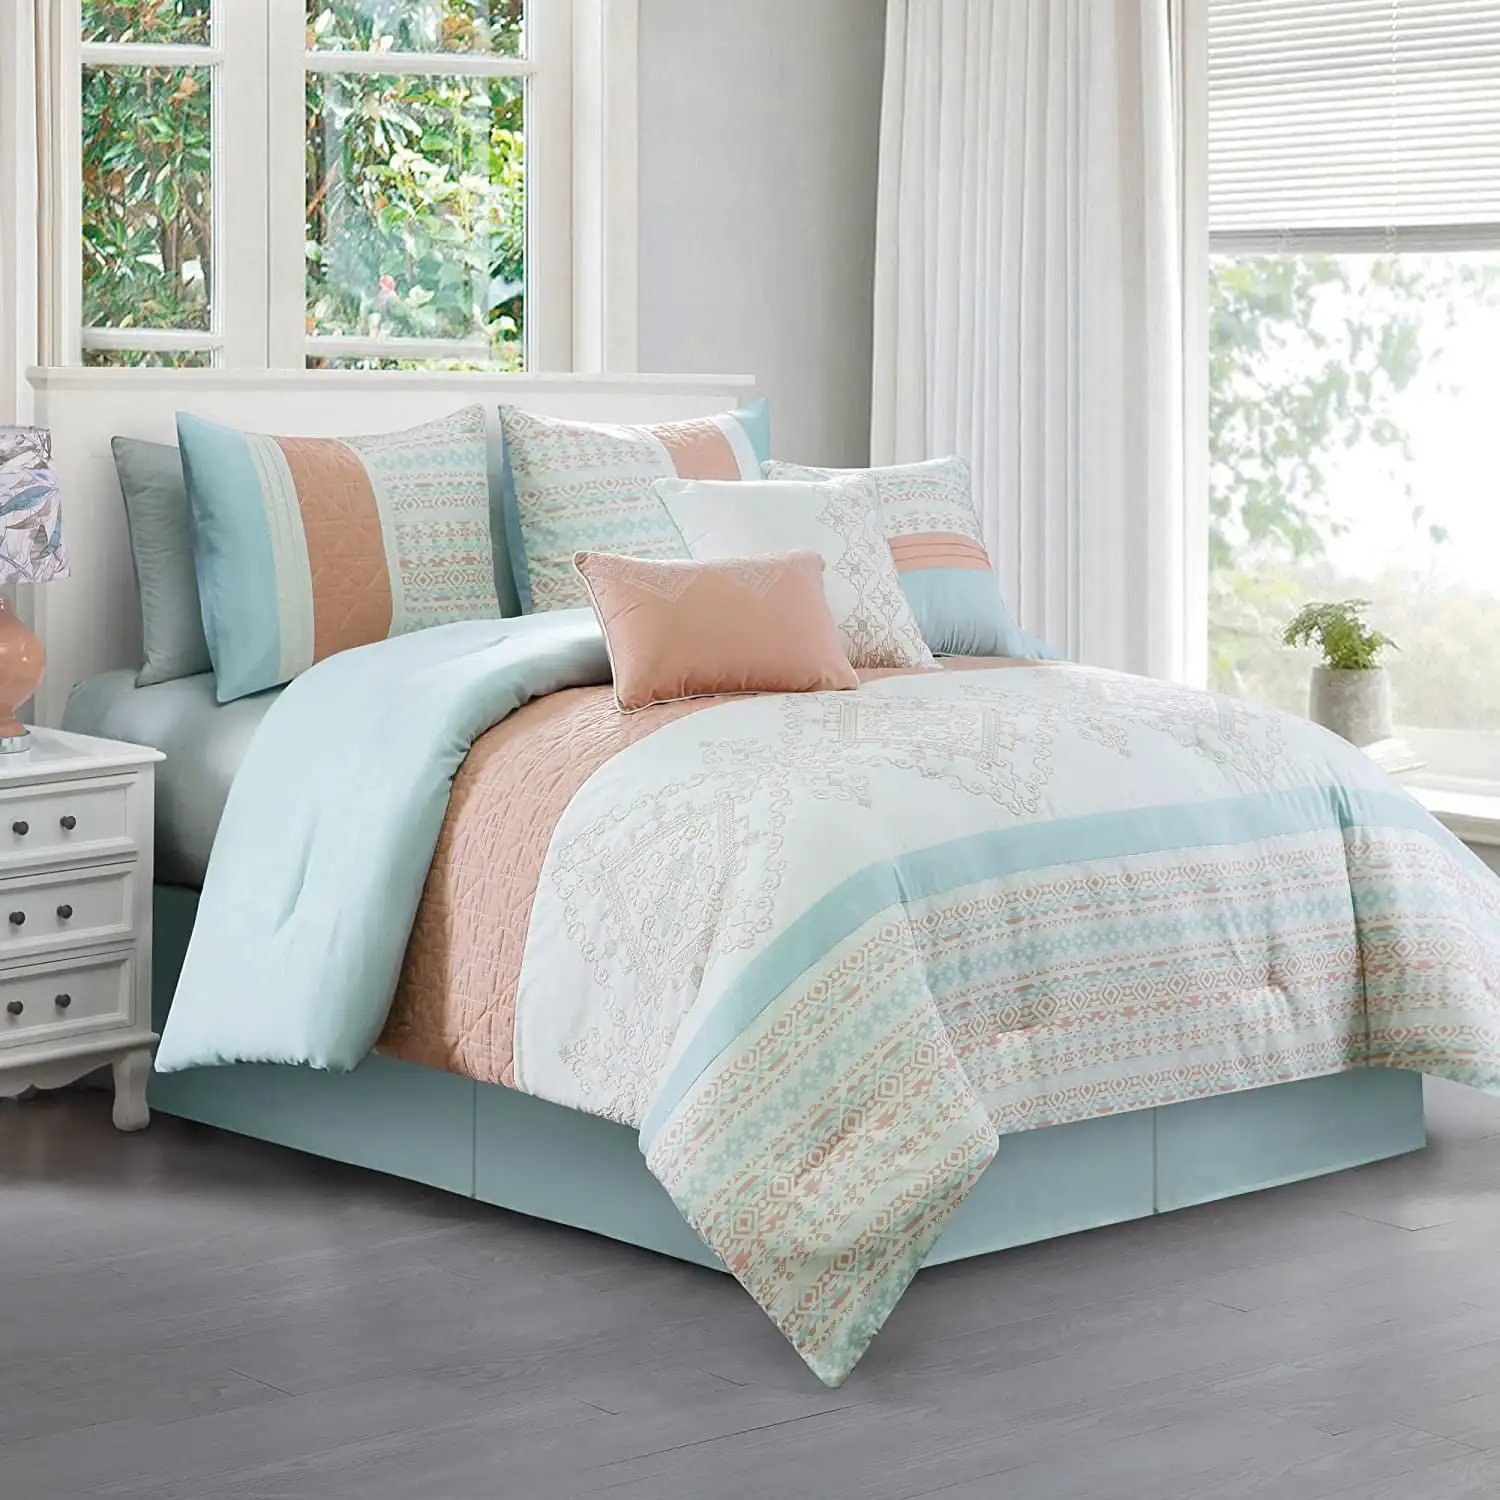 

Laura 7-Piece Bedding Set Coral Mint Blue White Embroidery Pleated Striped Comforter Set Queen Size